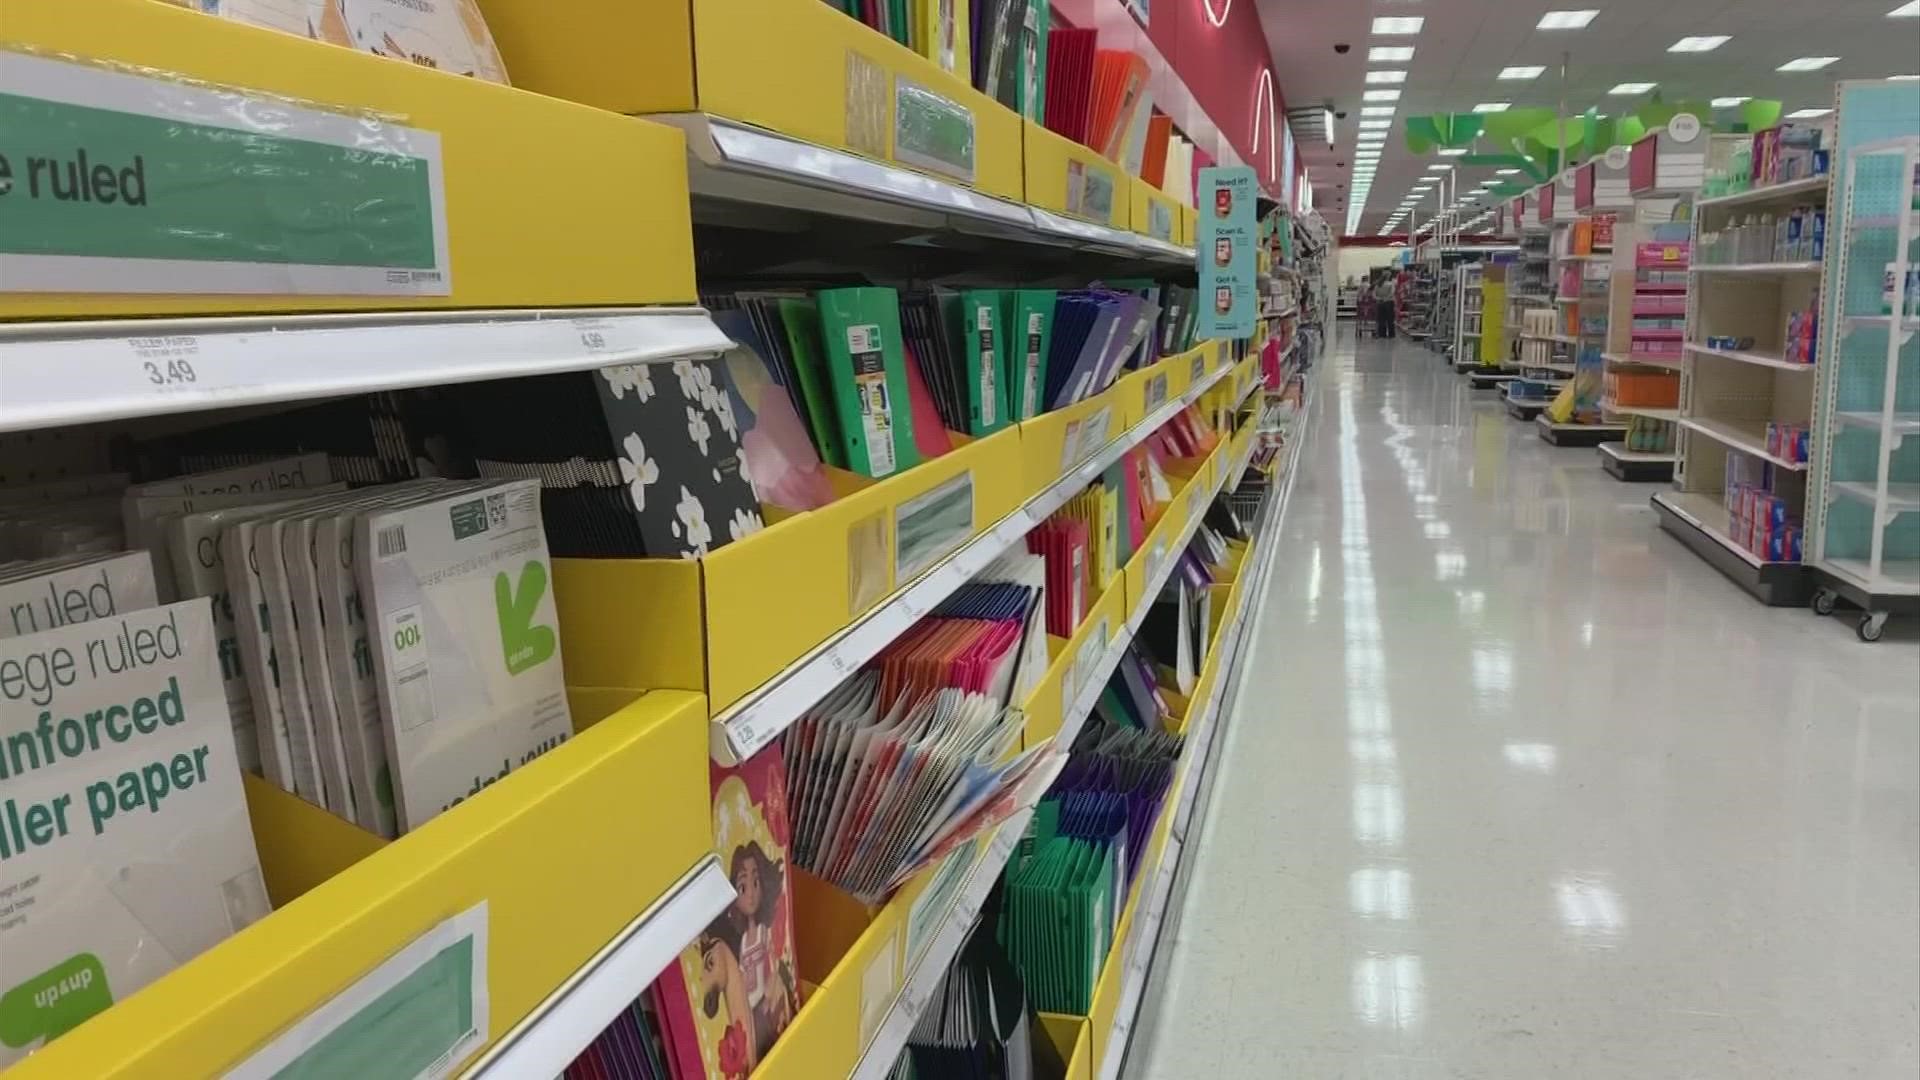 Back-to-school shopping is underway in stores across central Ohio and doctors and parents are giving advice on how to make shopping smooth for families.